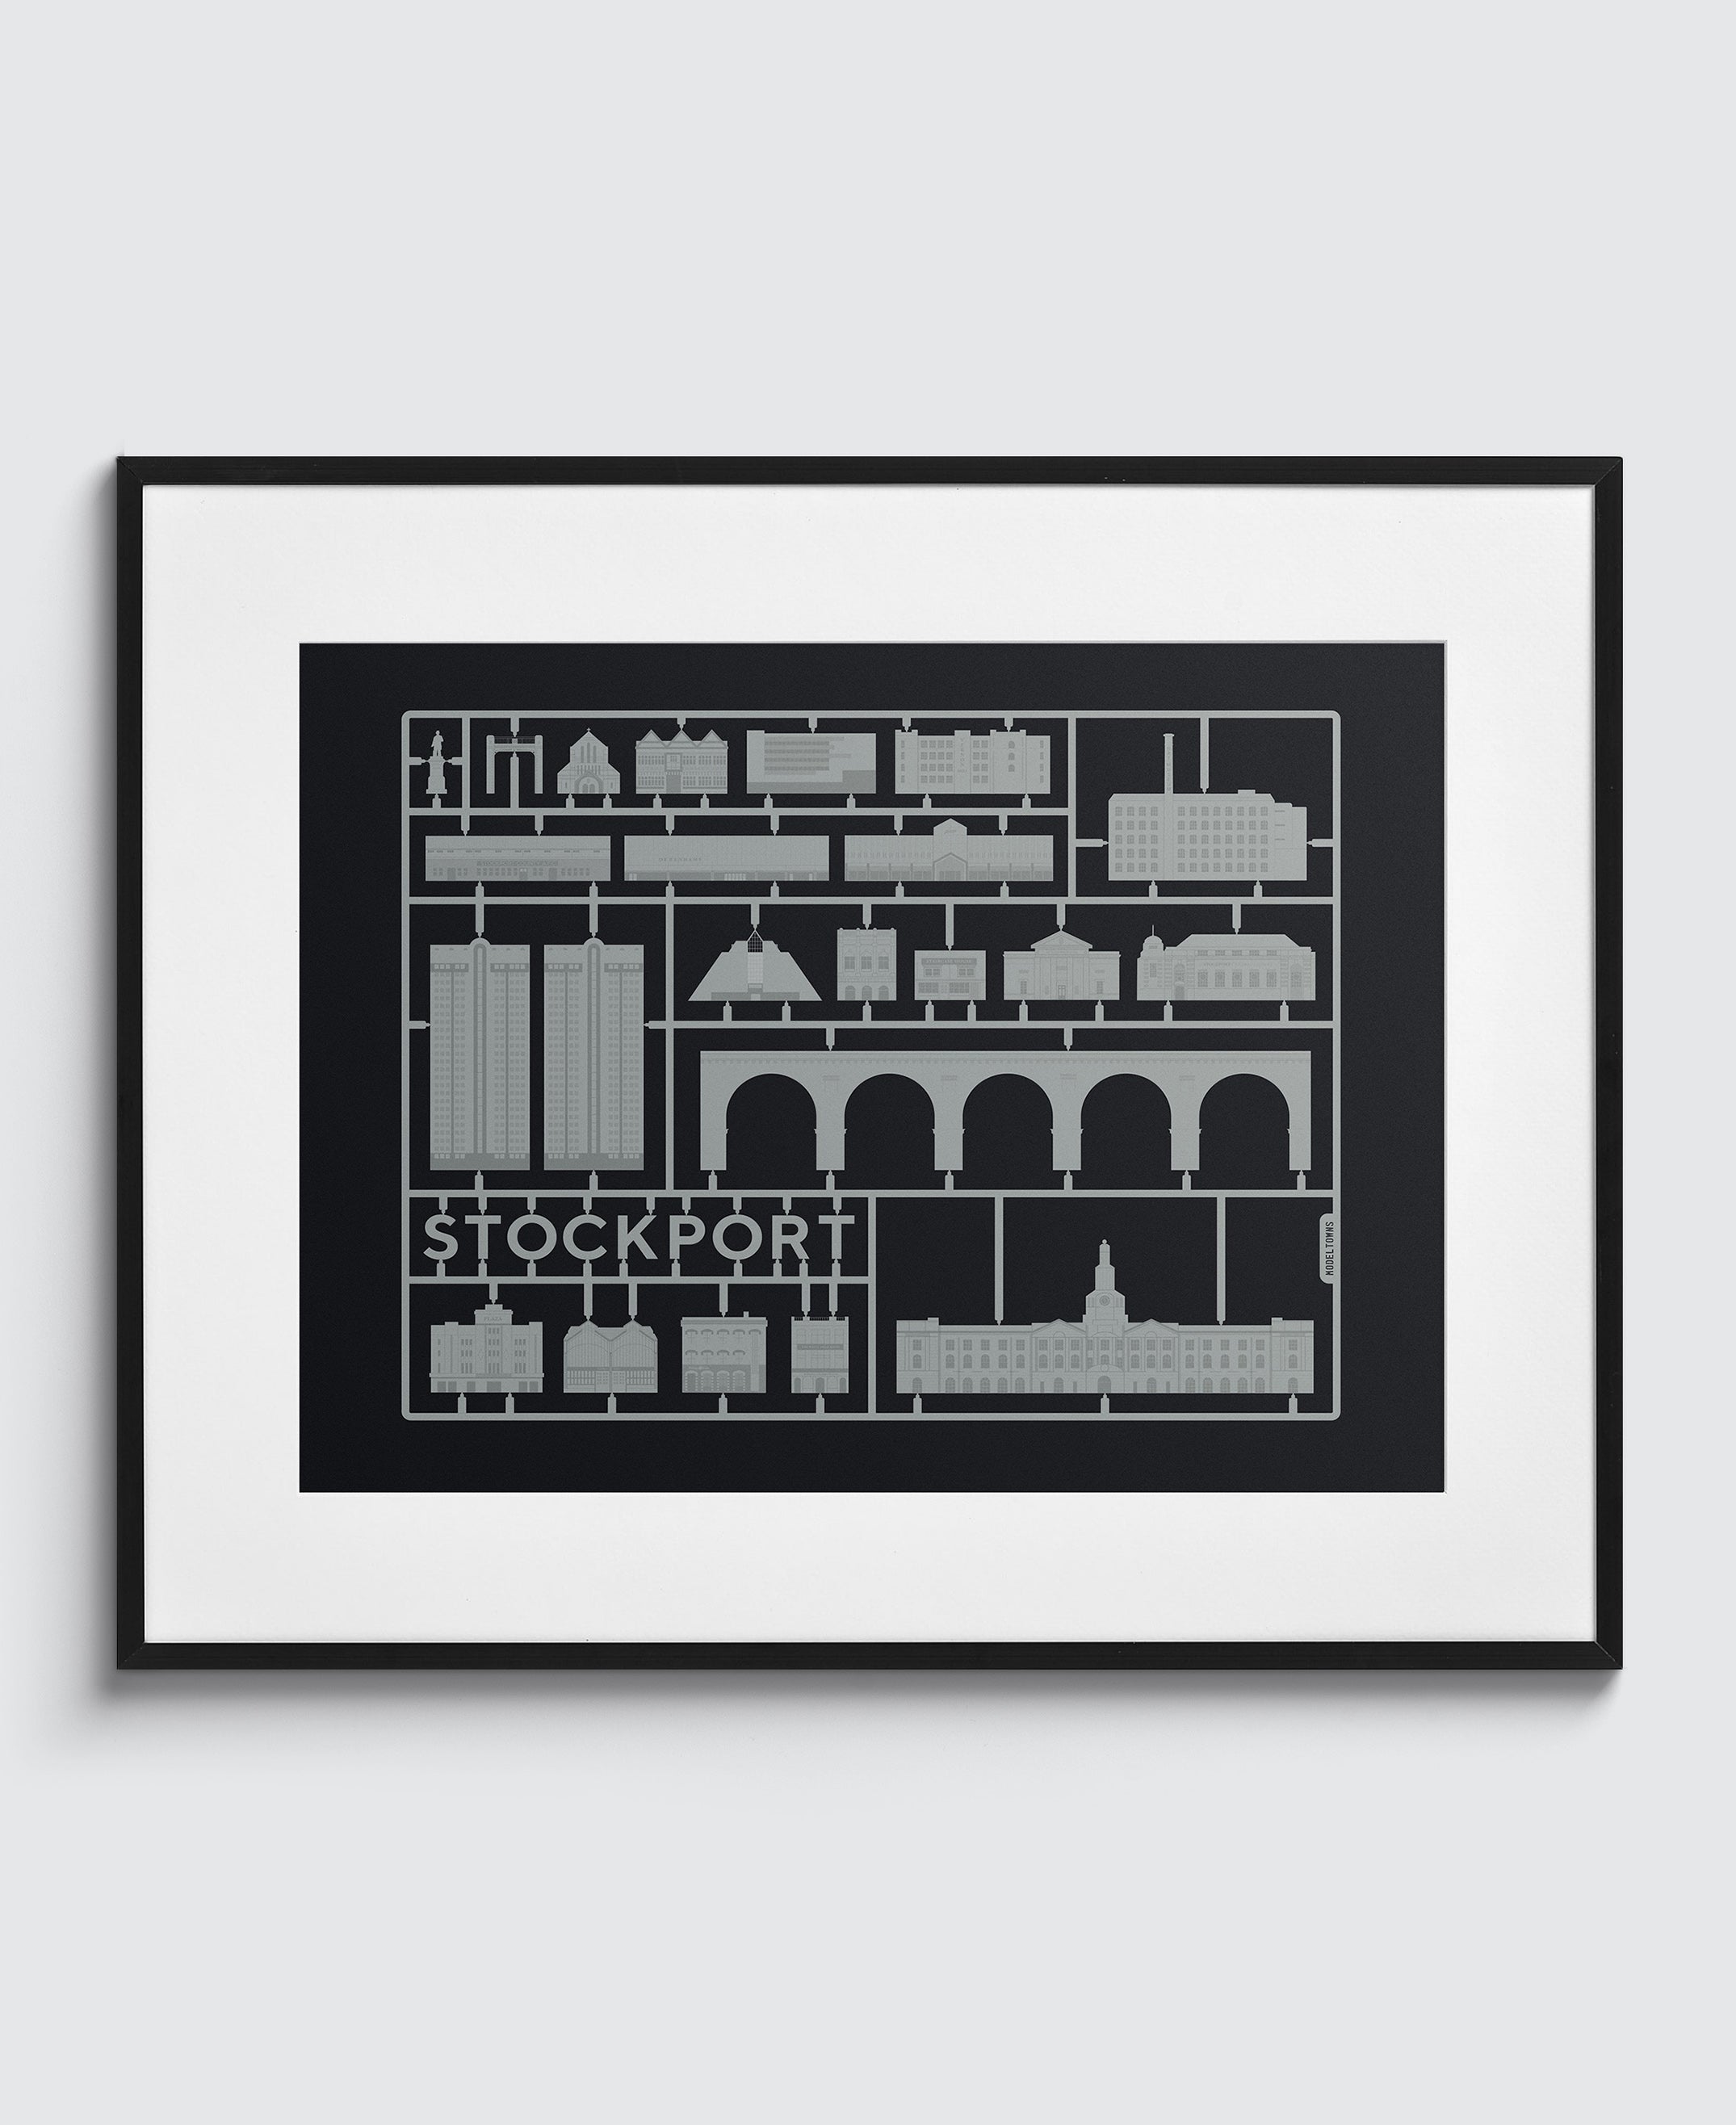 Model Town Stockport - over 30 illustrations of famous Stockport landmarks, all in the style of classic model kits.